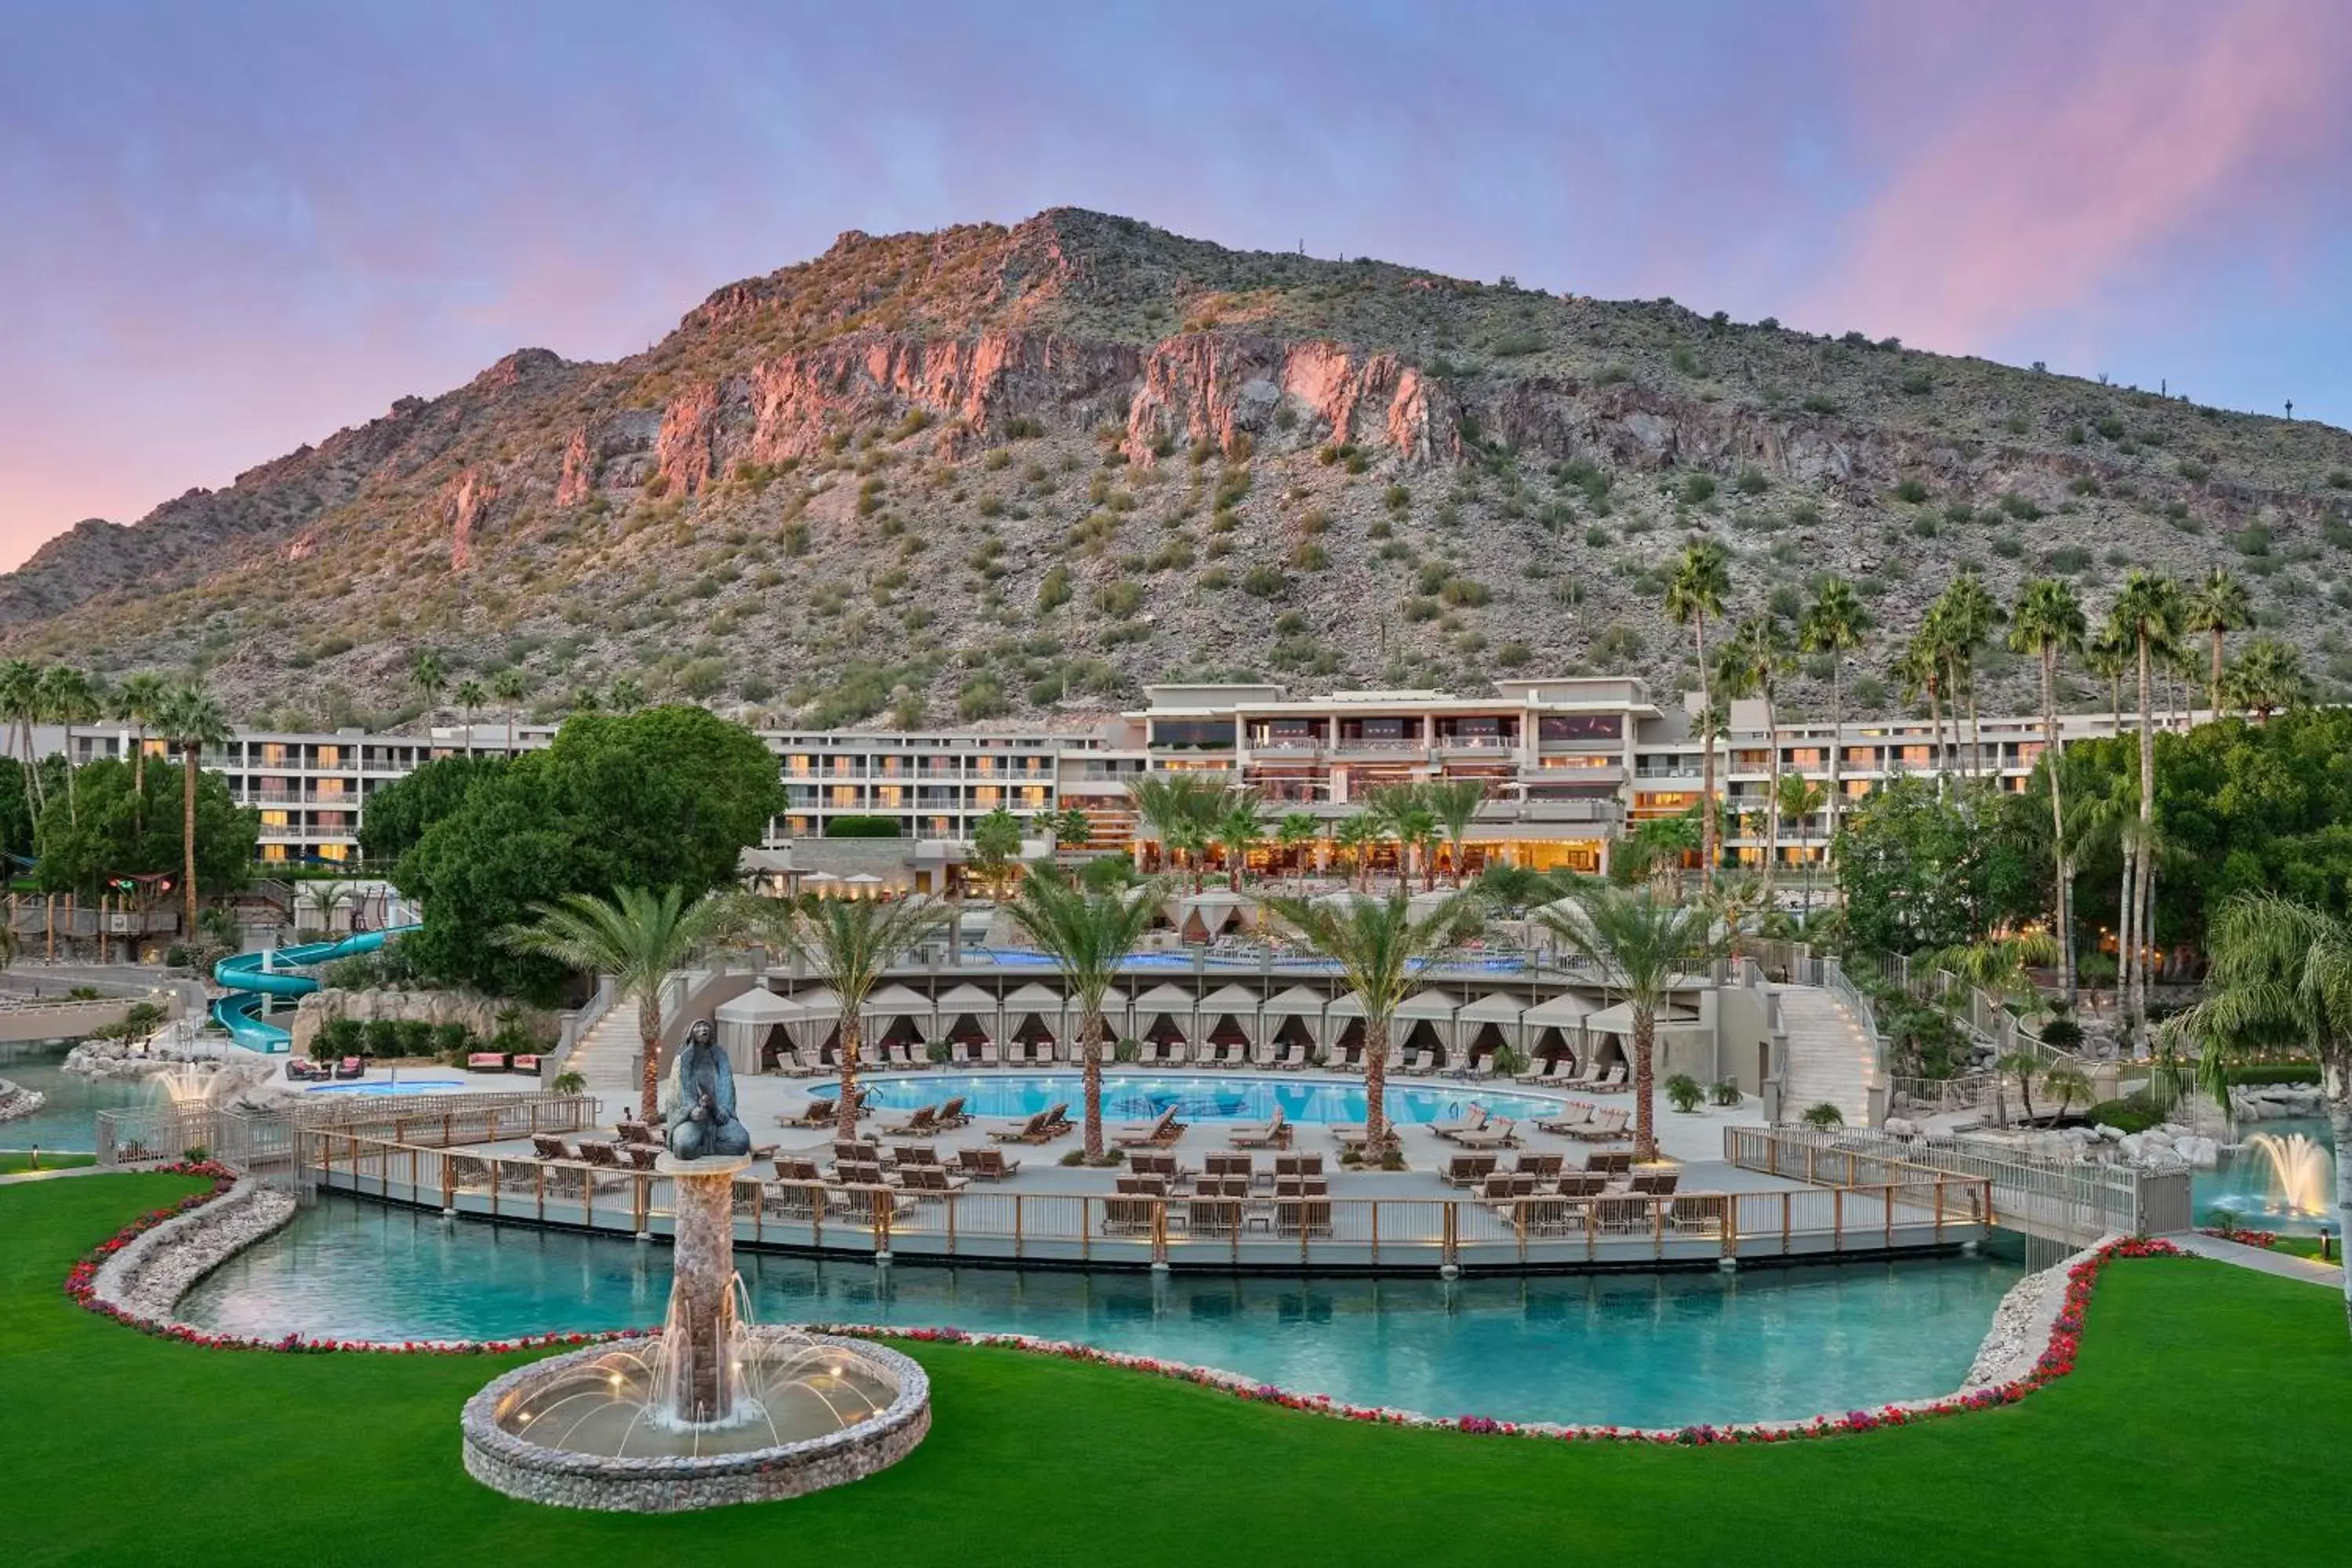 Property building, Pool View in The Phoenician, a Luxury Collection Resort, Scottsdale